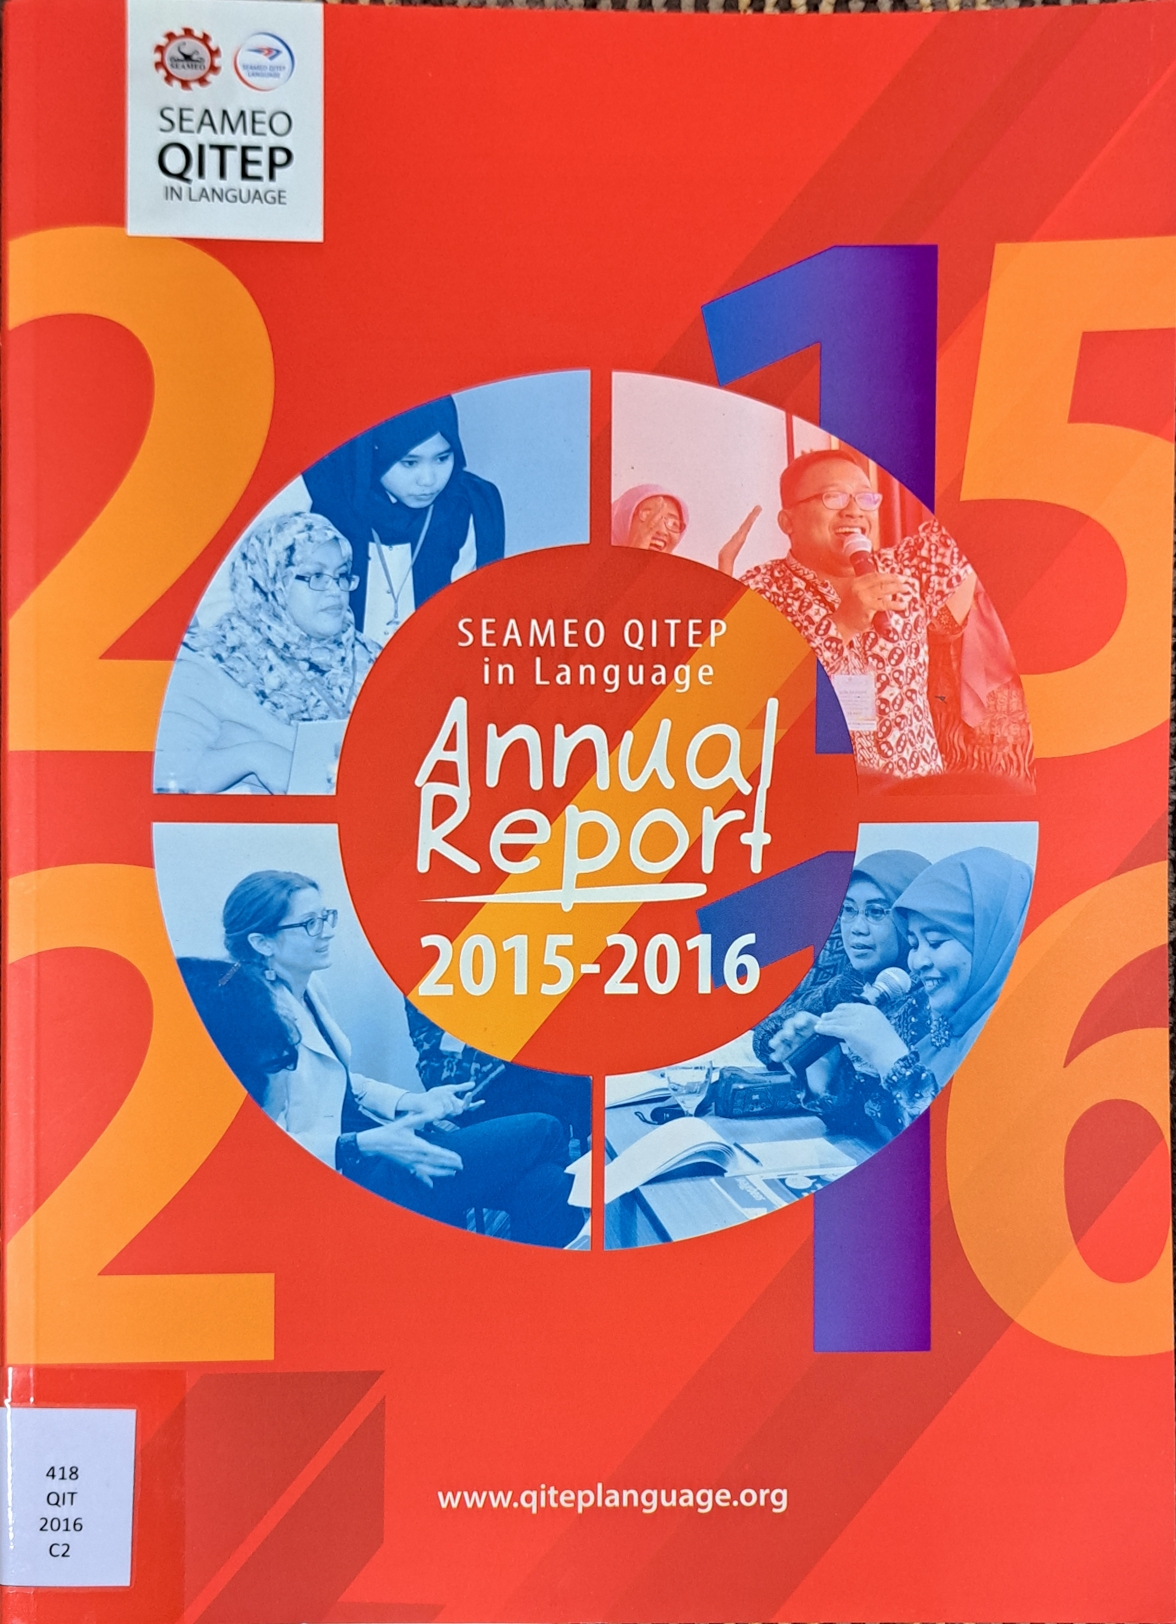 Cover image for Annual Report 2015 - 2016 SEAMEO QITEP in Language bibliographic